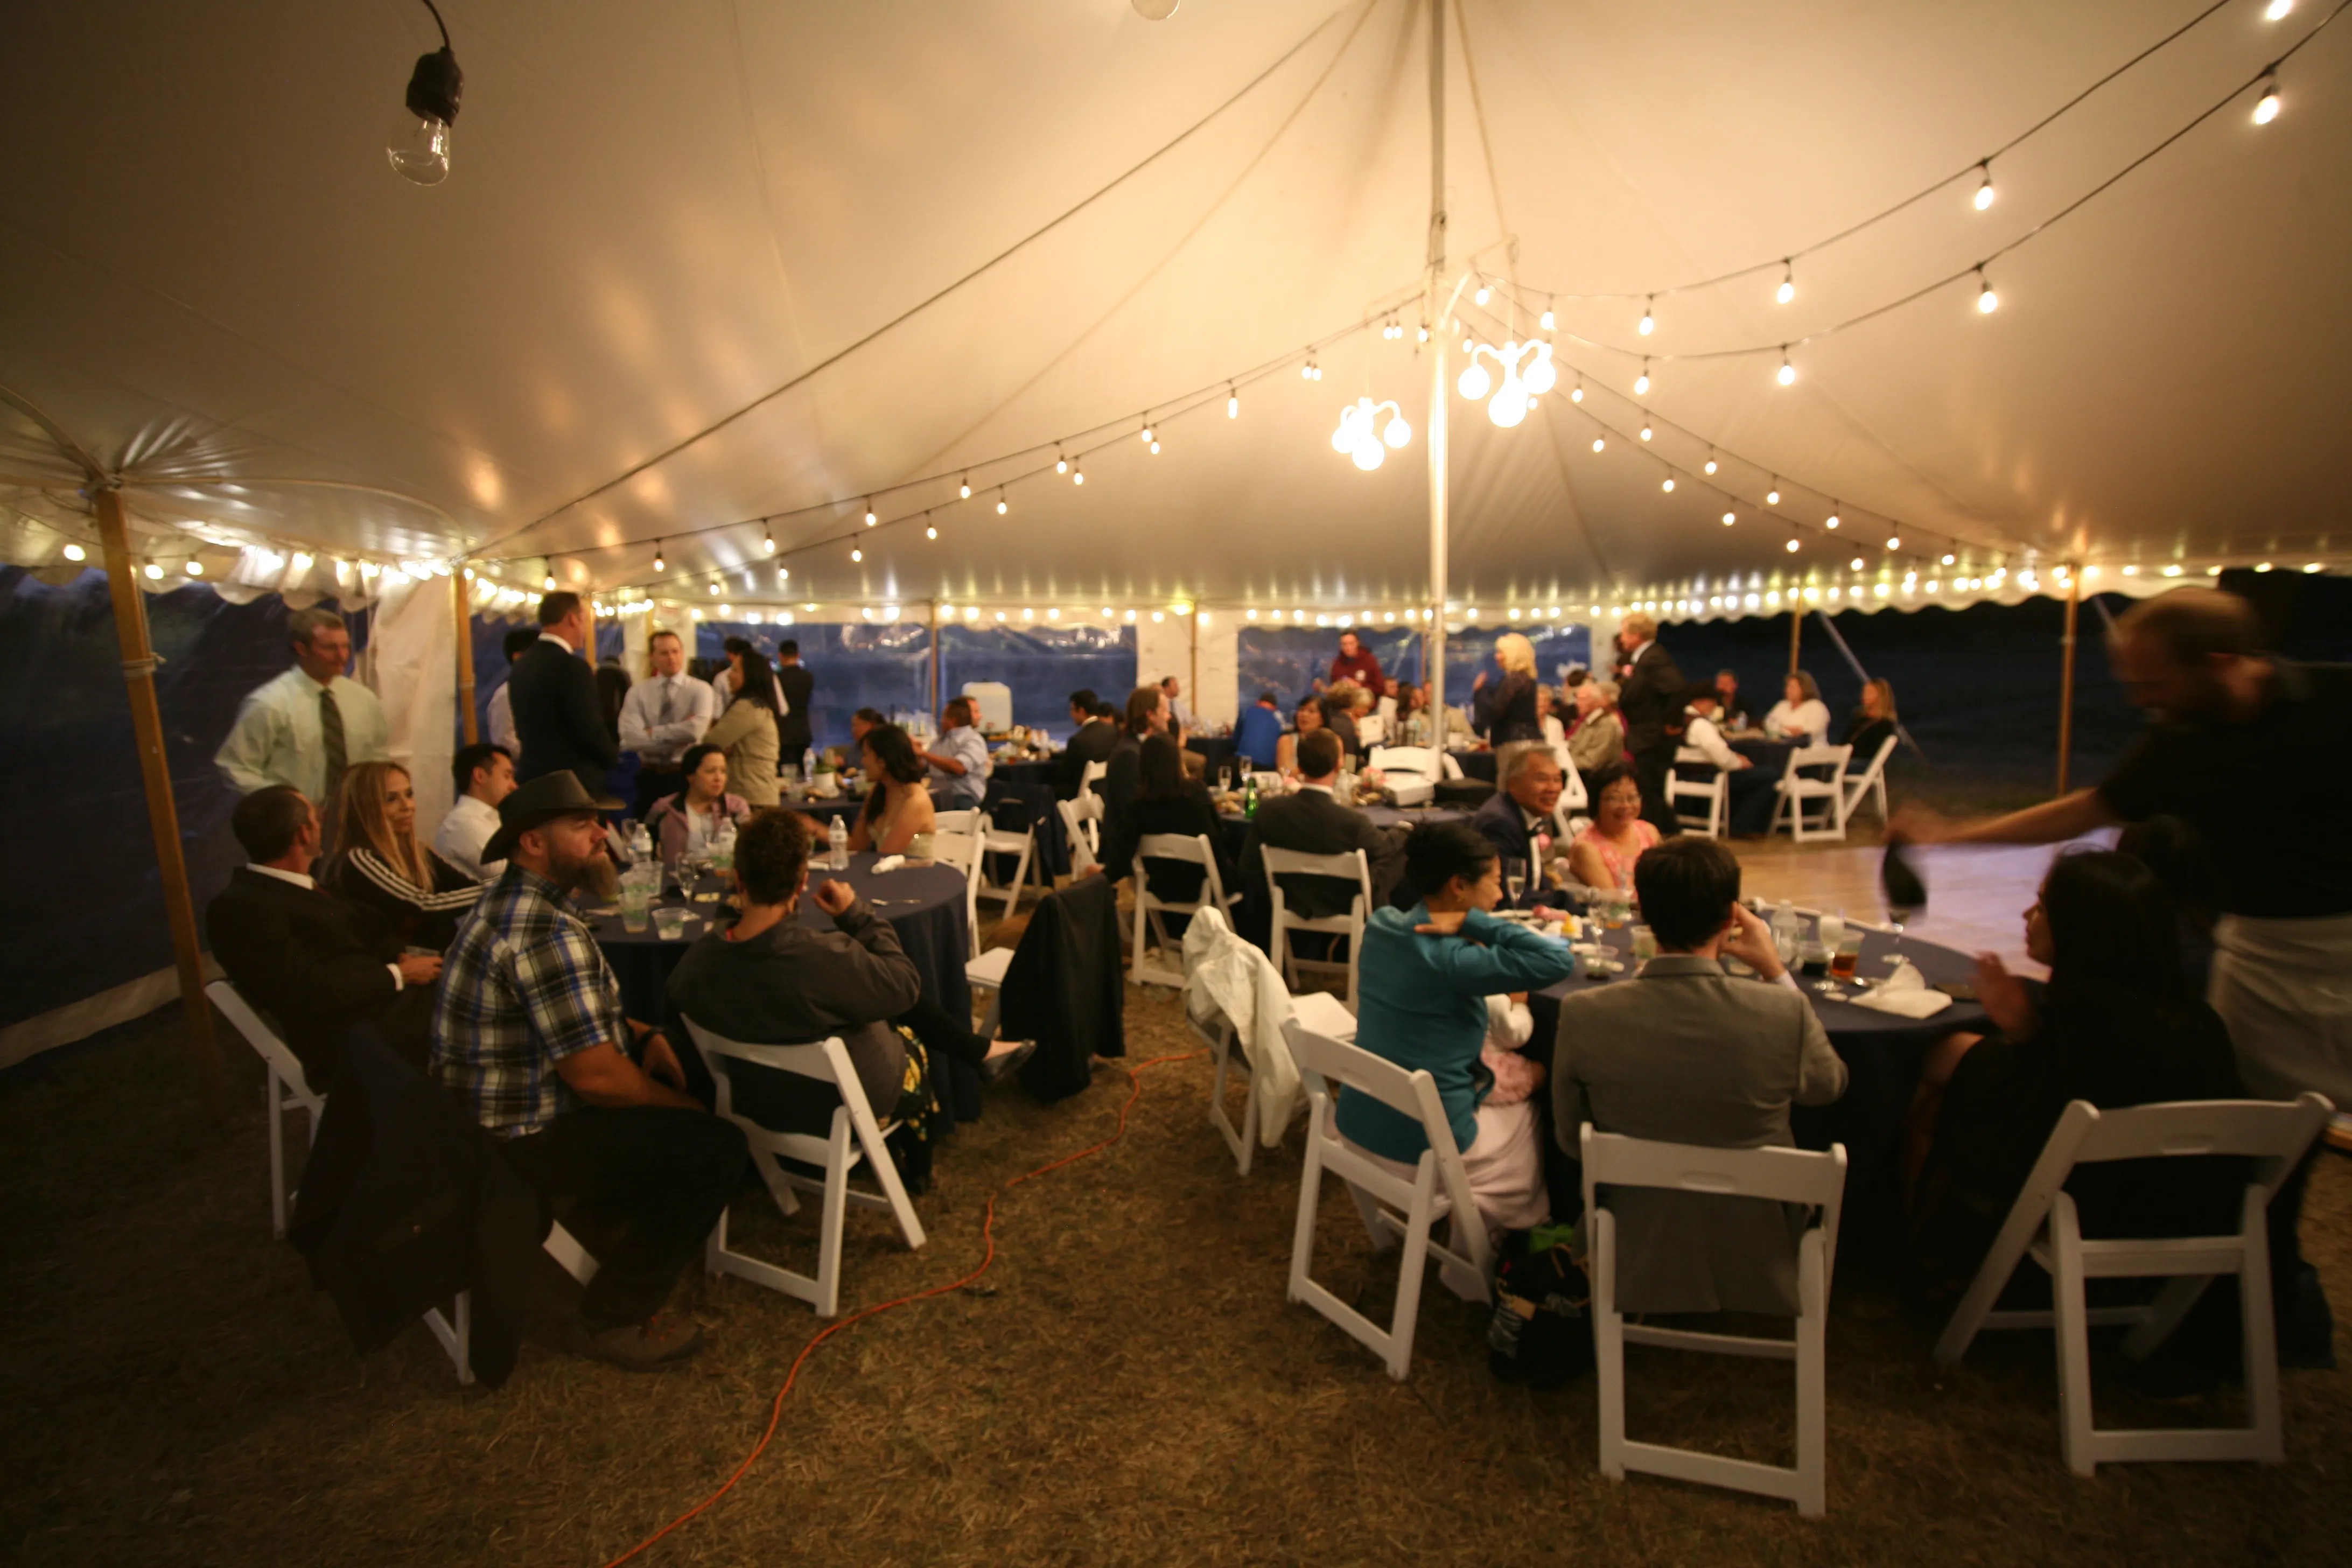 wedding reception in tent at night